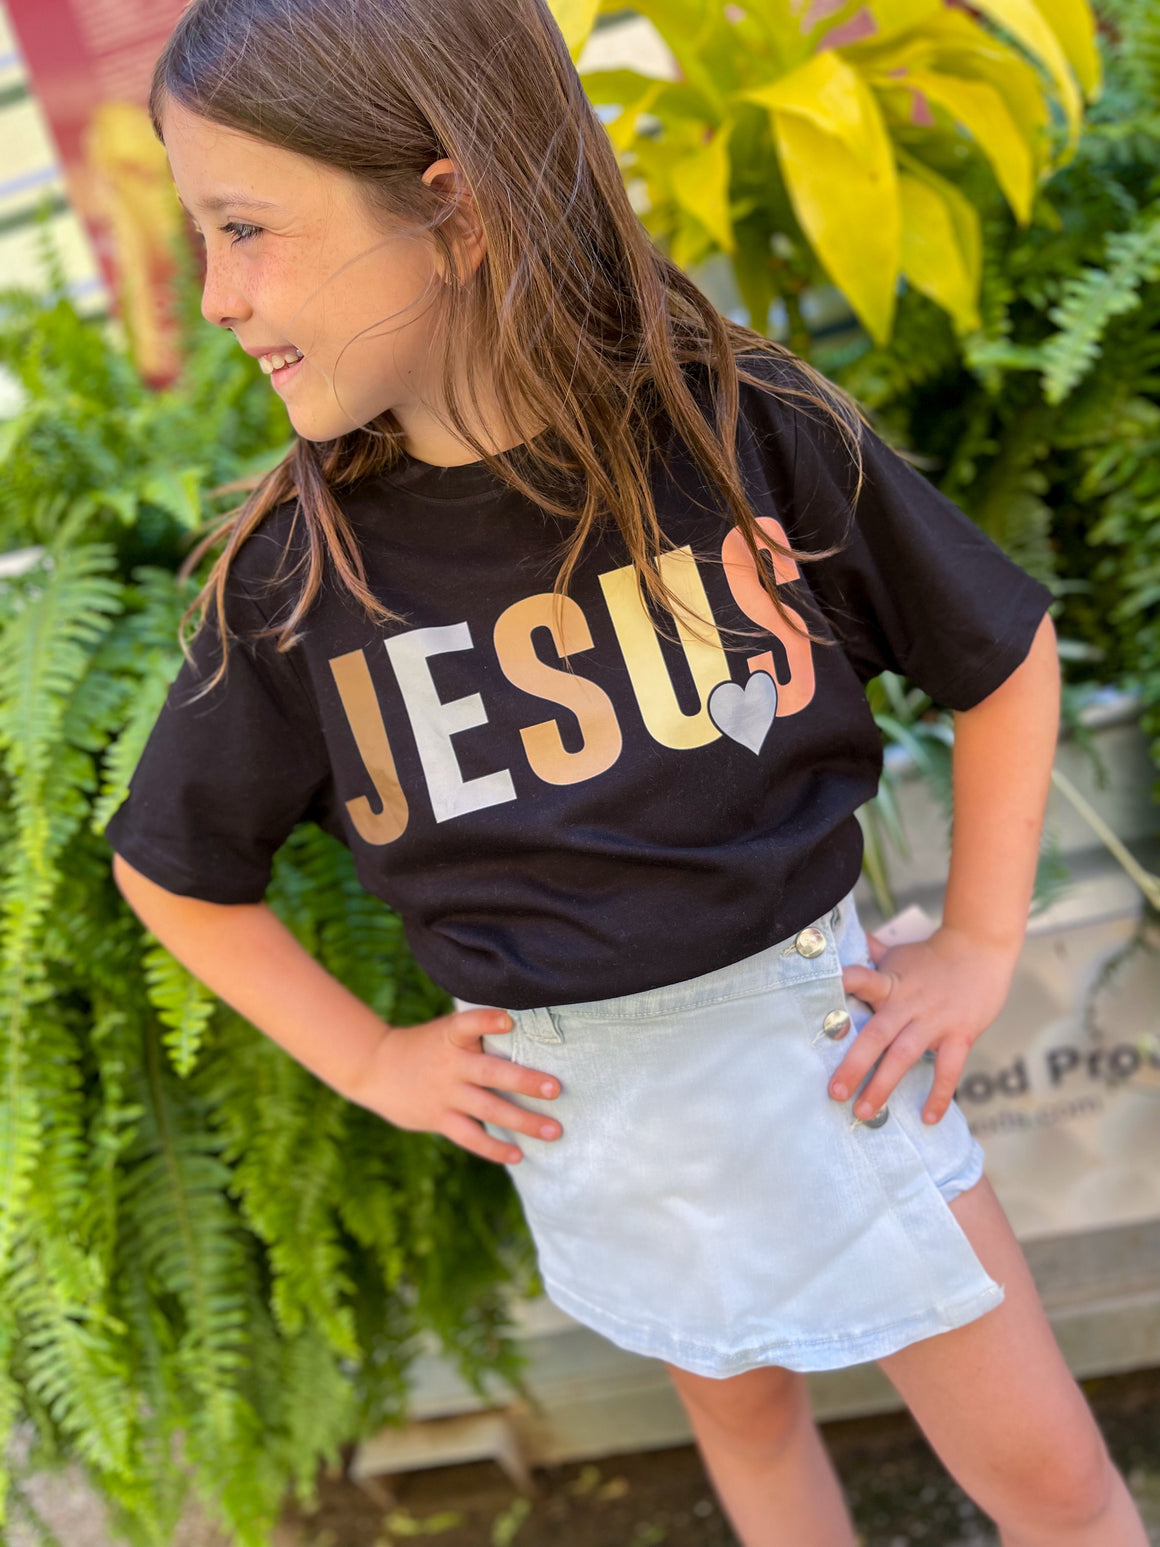 Jesus Colorful Youth Graphic T-shirt